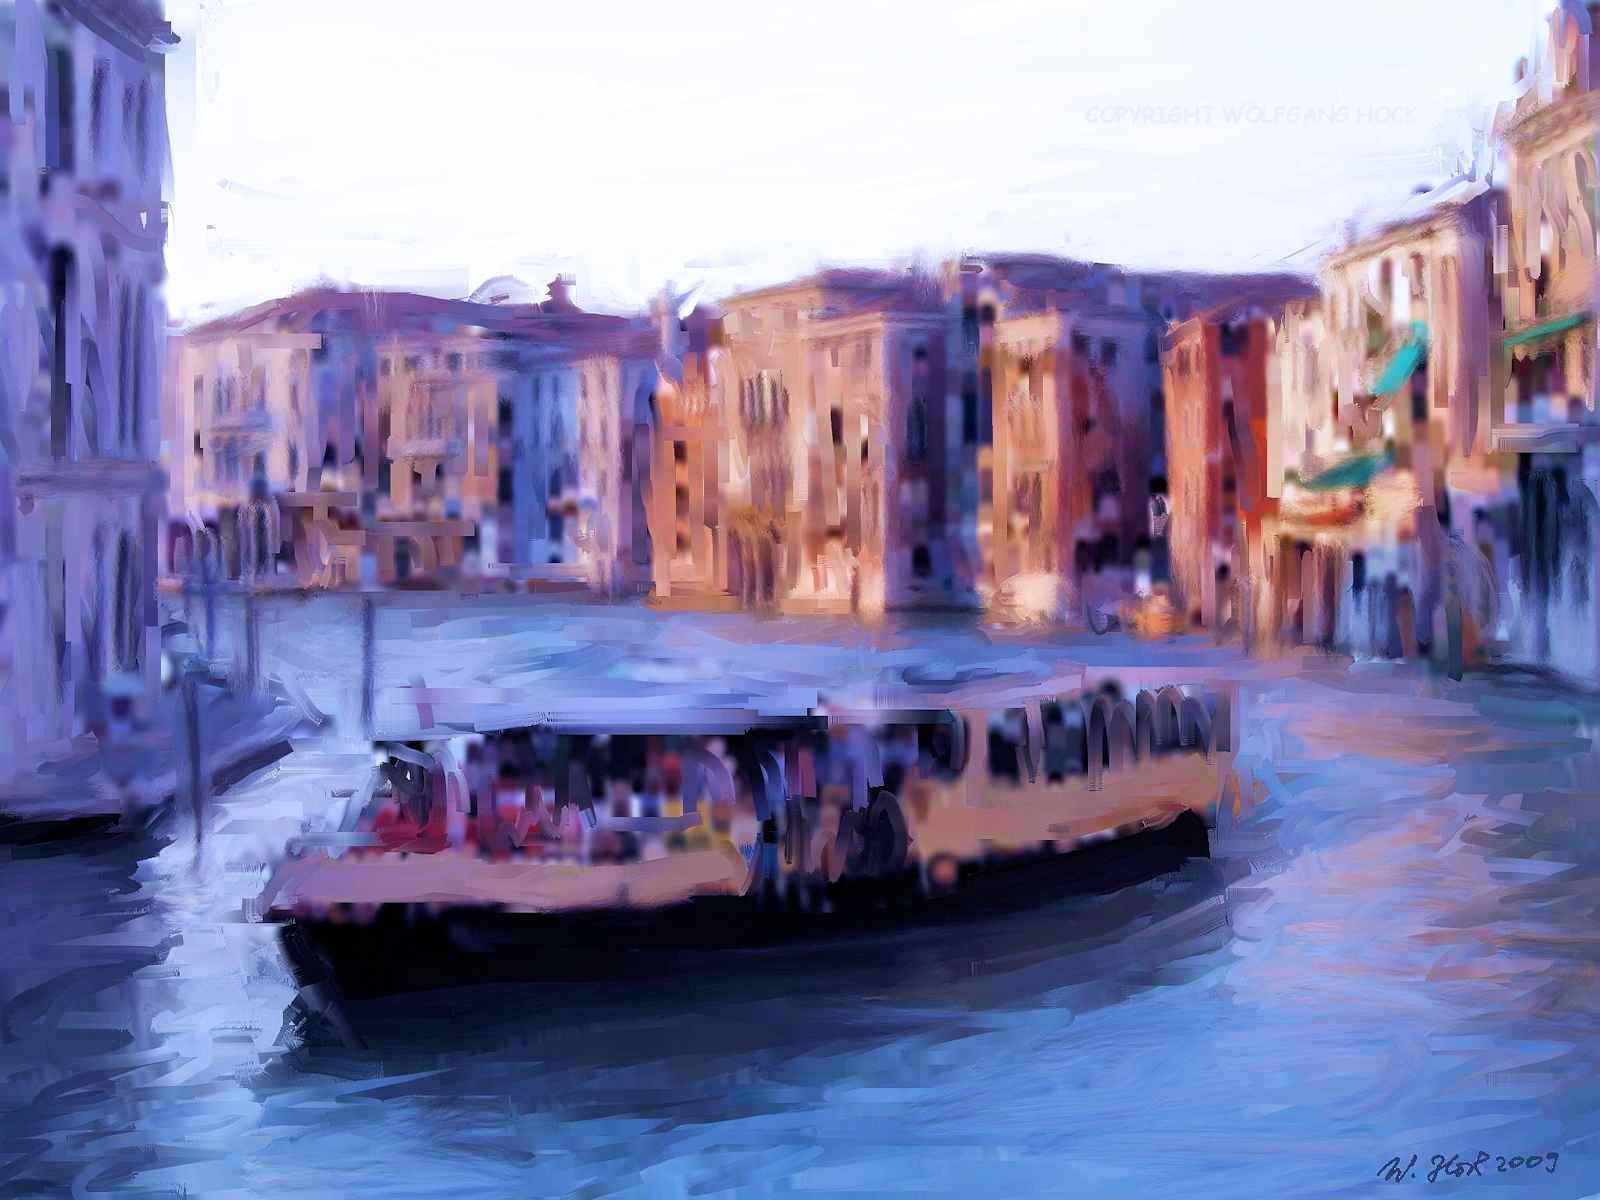 Canal grande with vaporetto 2009   Inkjet printed computer painting on paper, edition of 5 54 x 40 cm (5 megapixel)